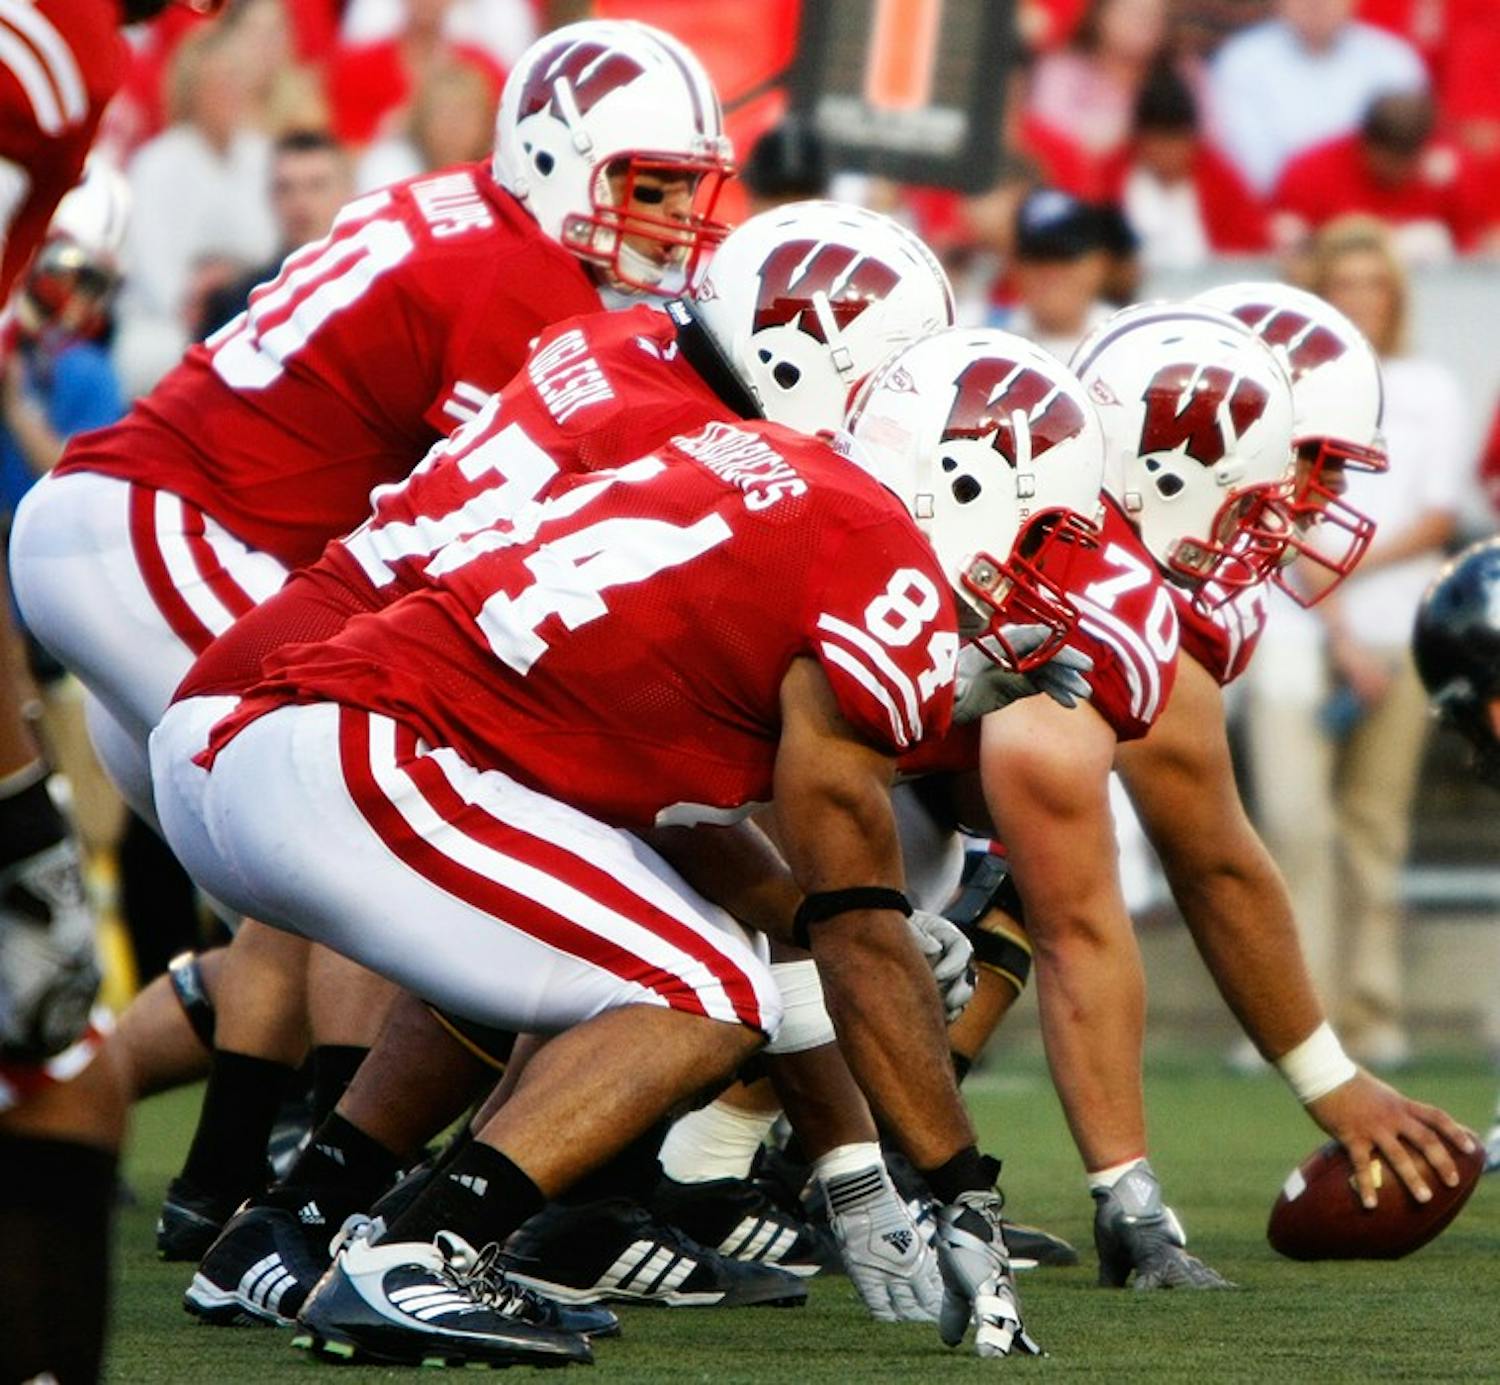 Badgers use new style for same approach